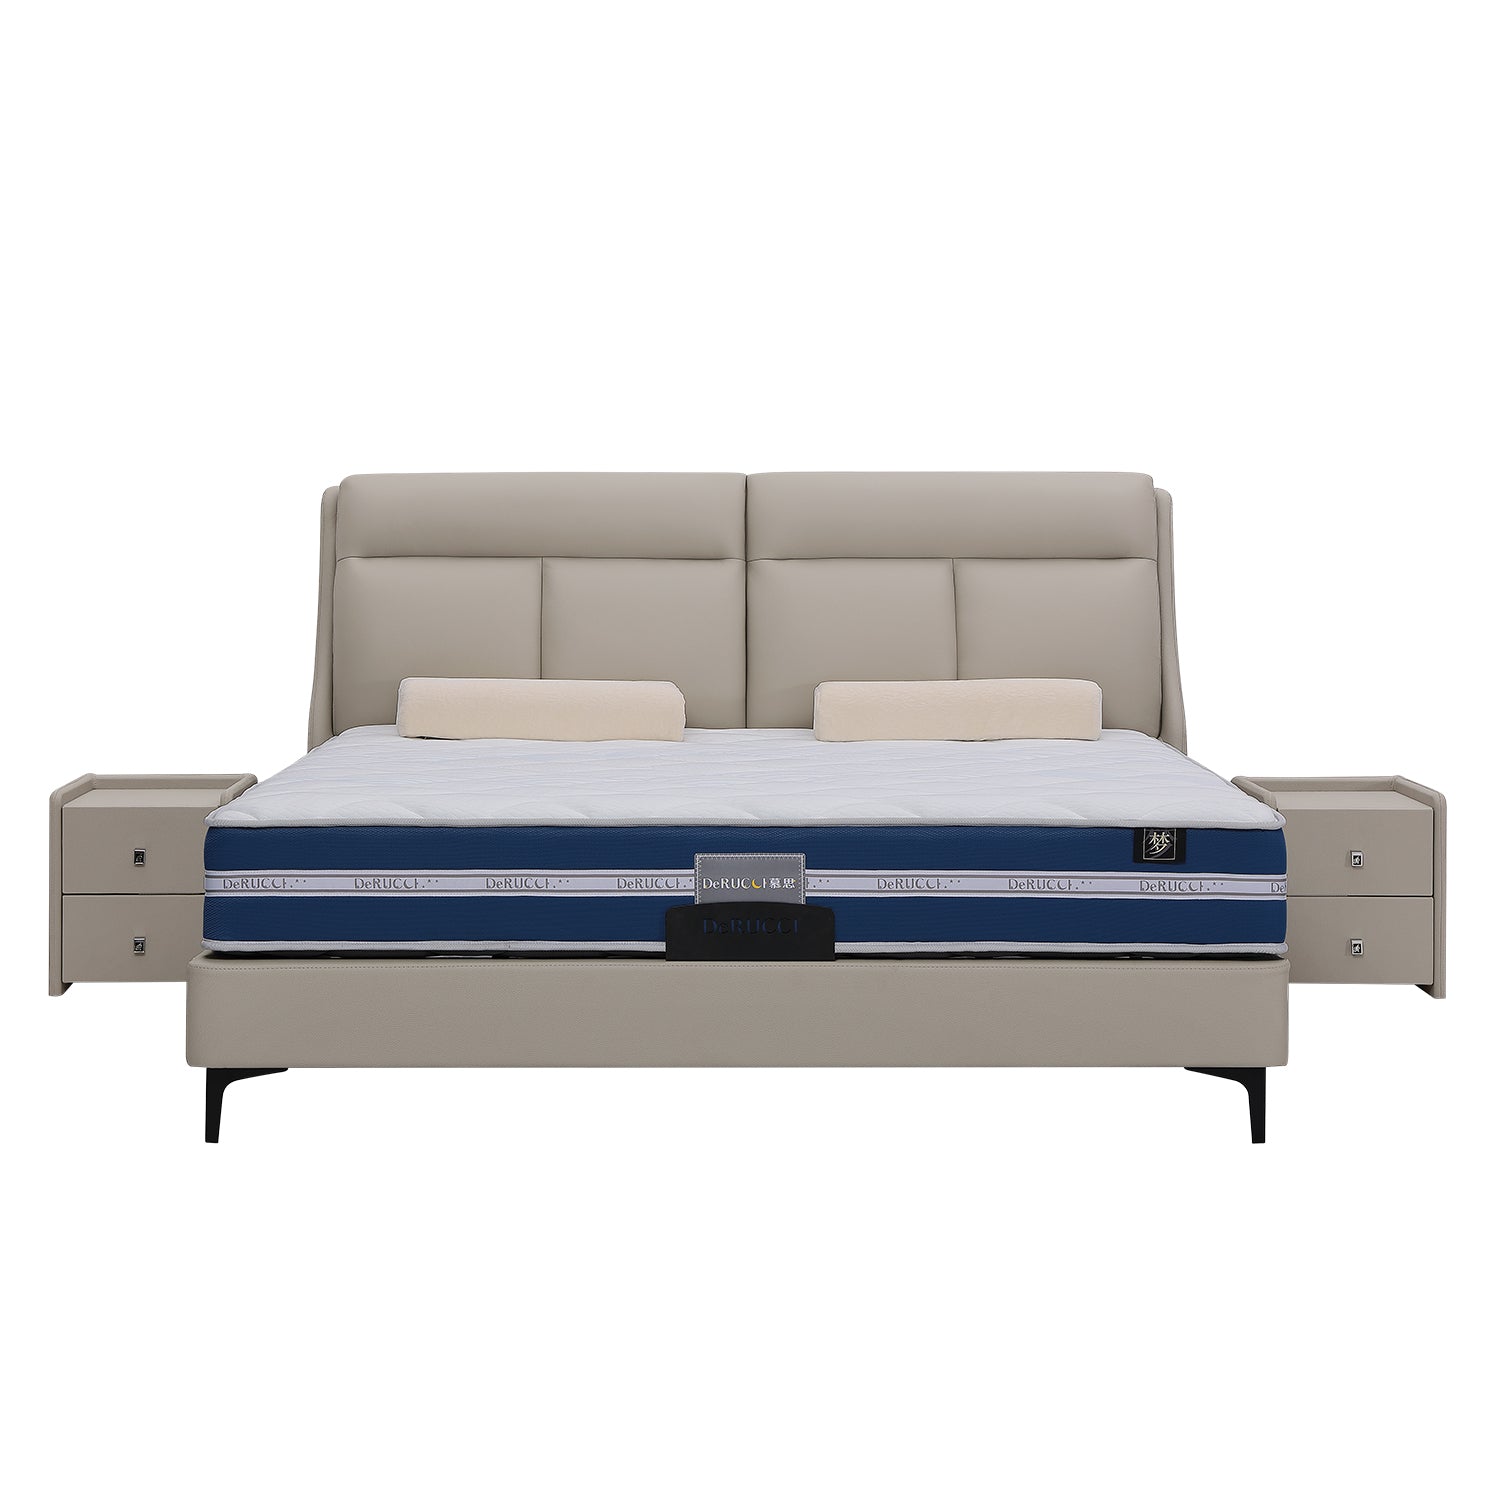 Modern beige bed frame BOC1-002 with upholstered headboard, blue mattress, and matching beige nightstands with drawers